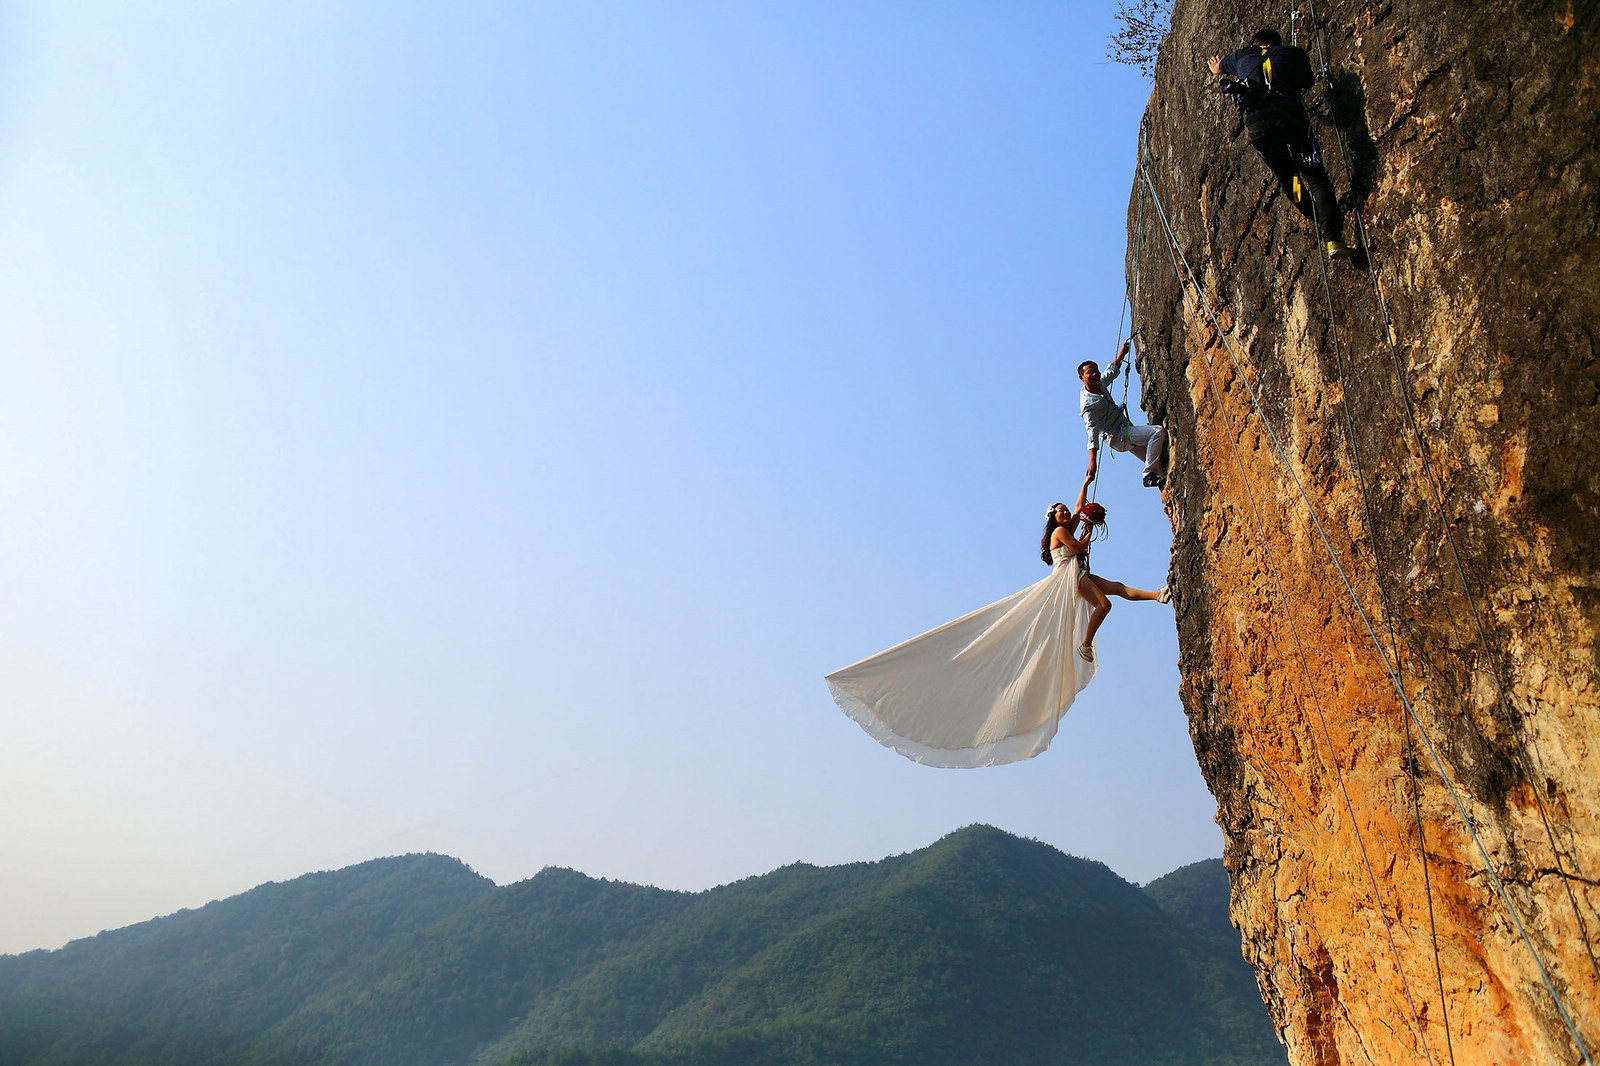 Zheng Feng, an amateur climber takes wedding pictures with his bride on a cliff in Jinhua, China.